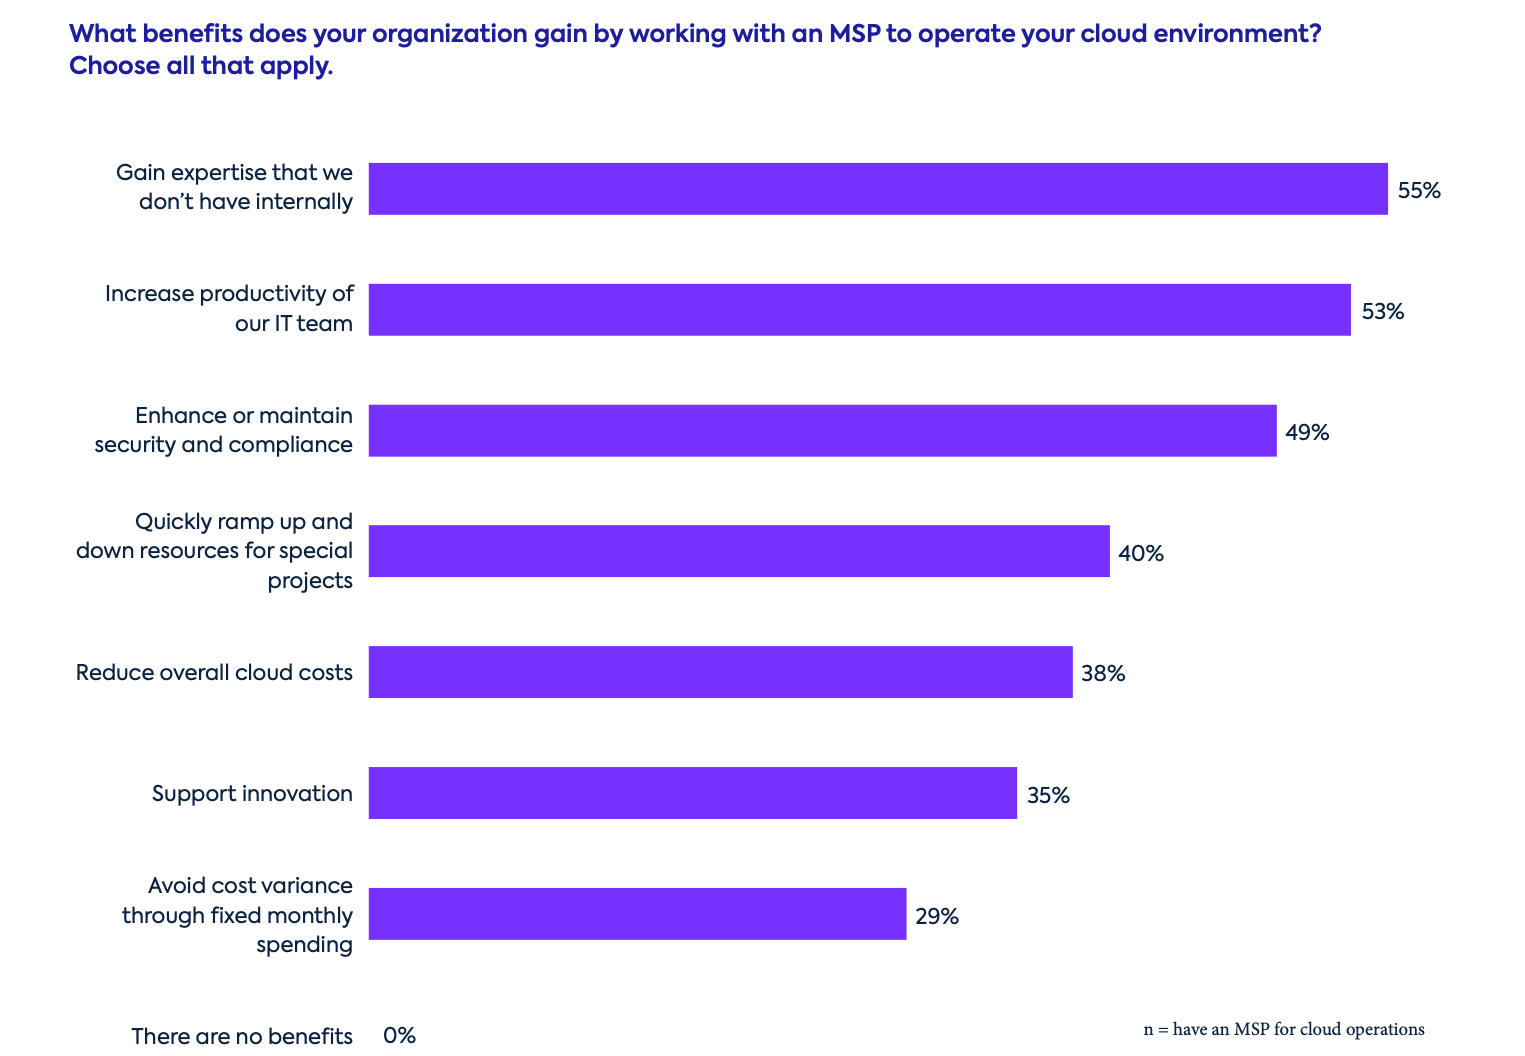 MSPs for cloud operations: benefits list from the 2022 Cloud Infrastructure Report